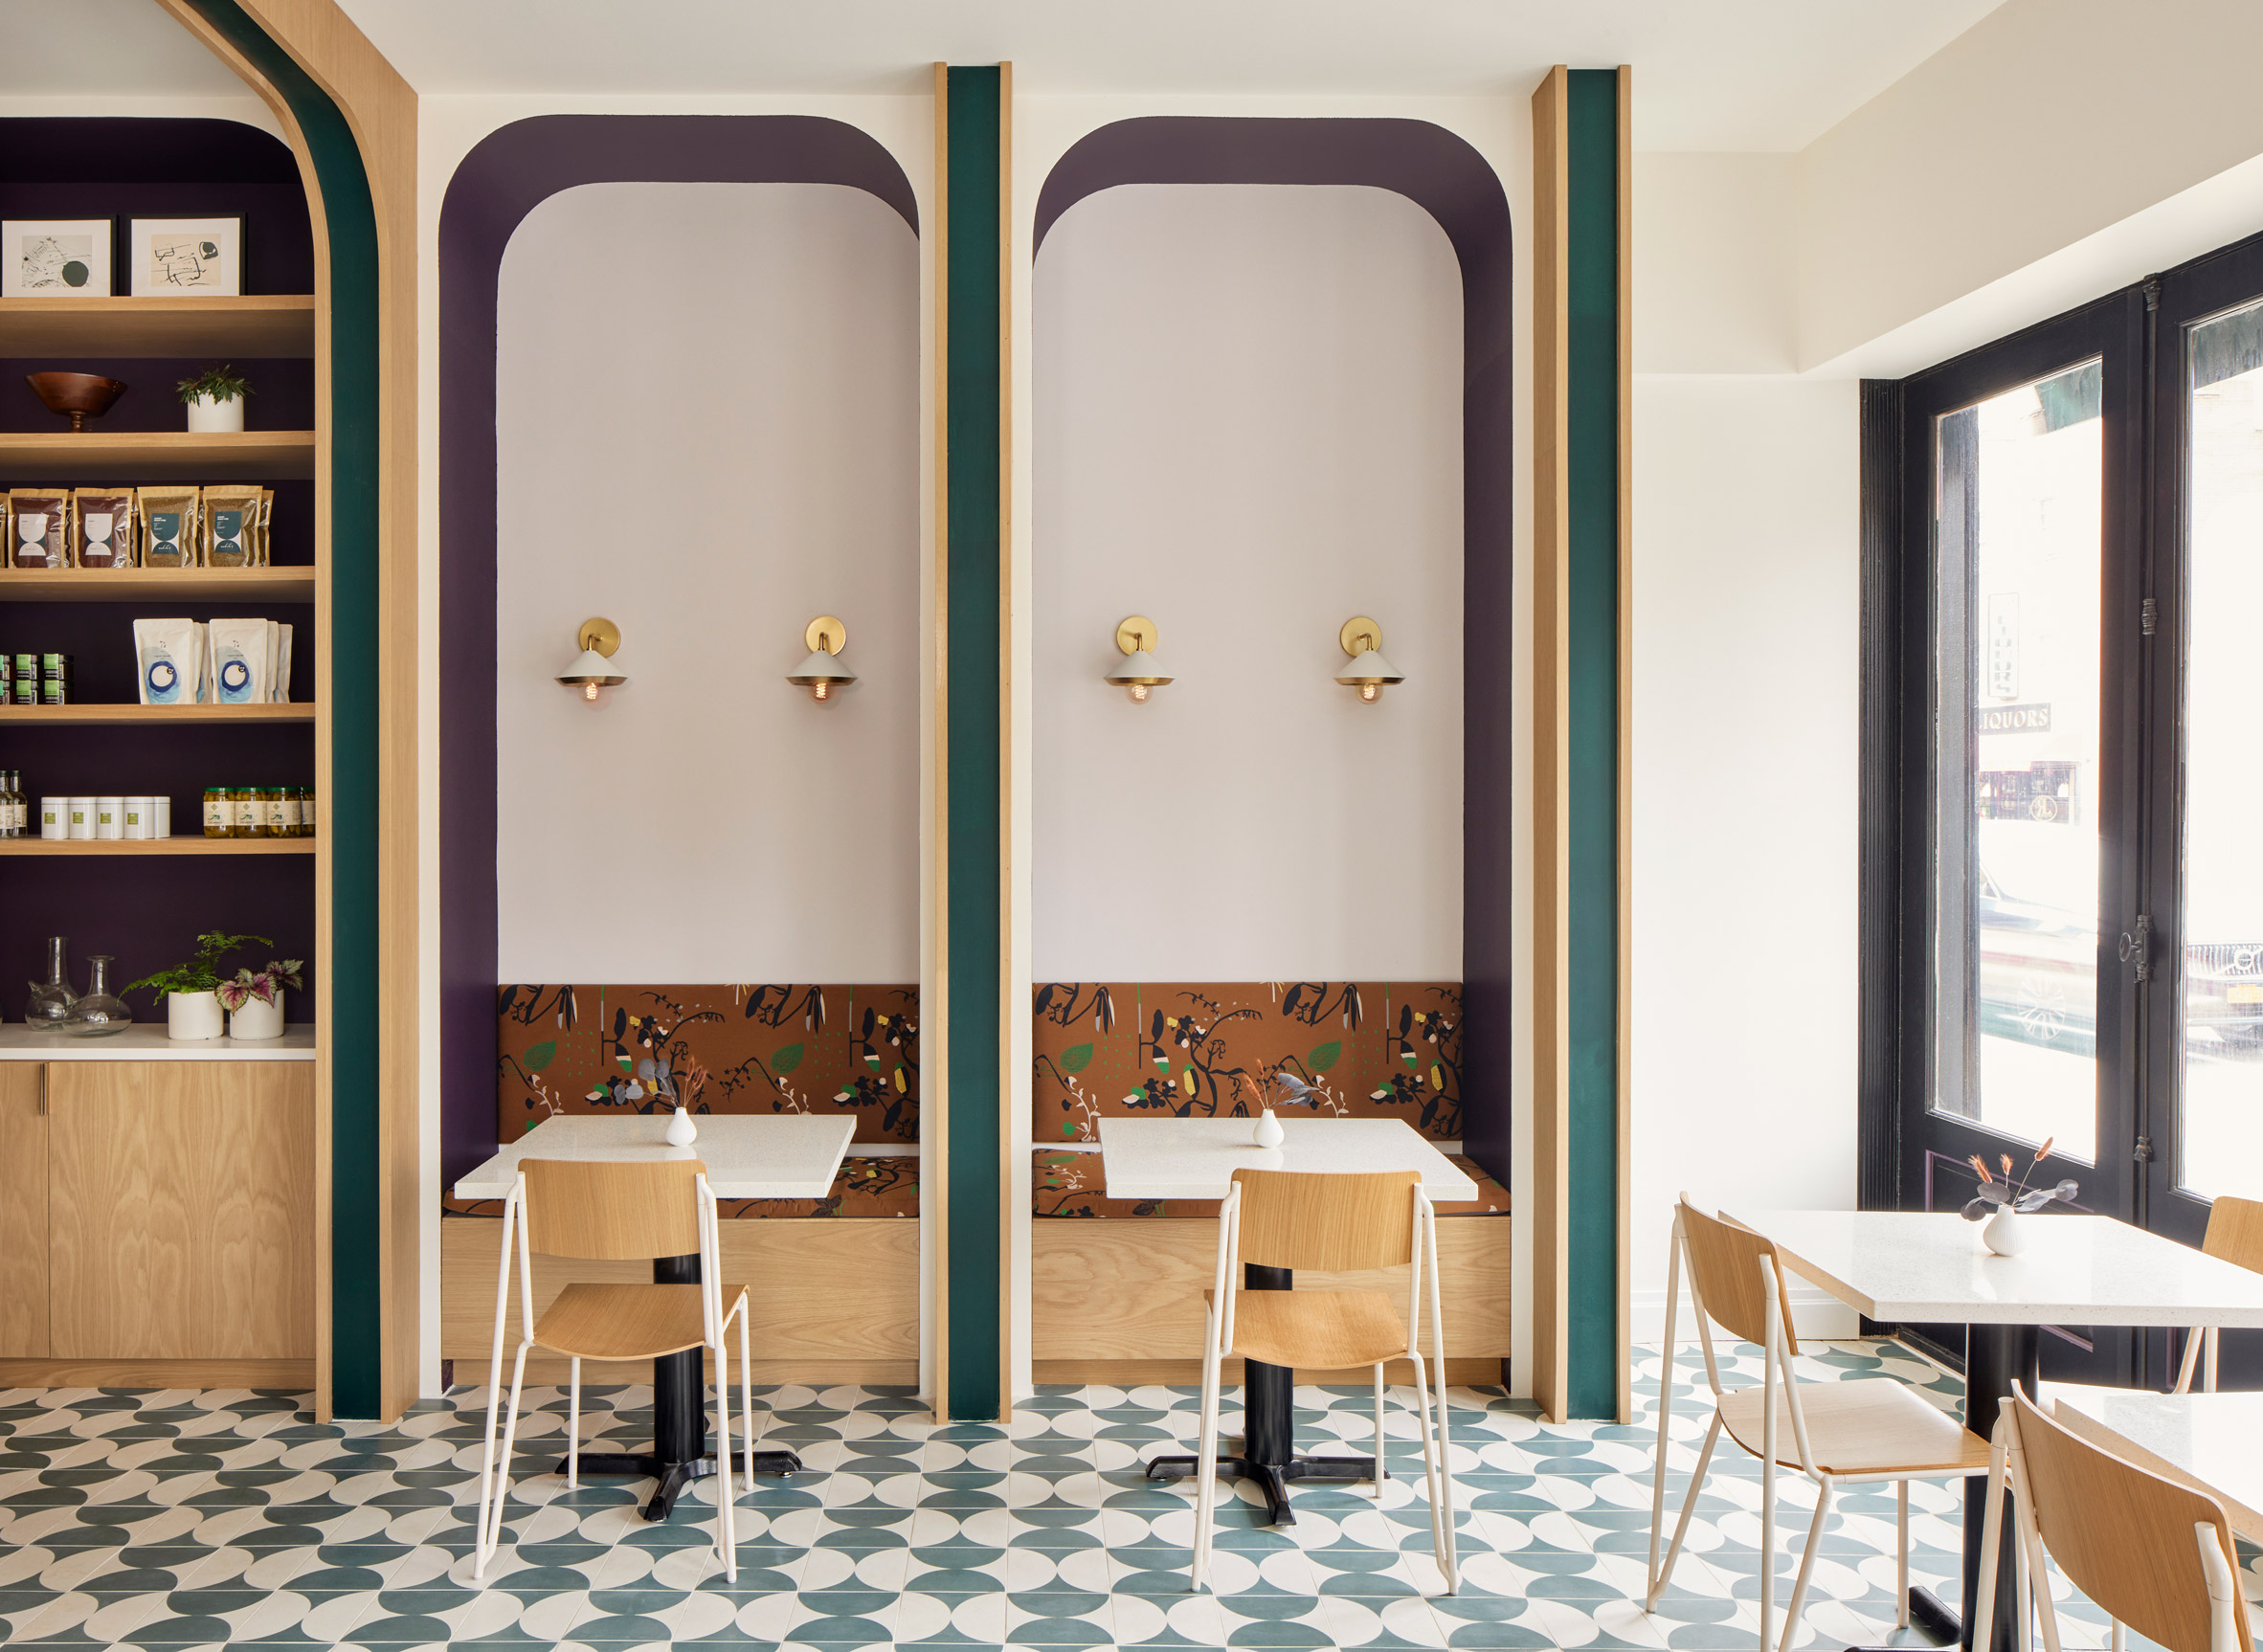 Purple and green accents painted onto walls of patterned restaurant seating booths